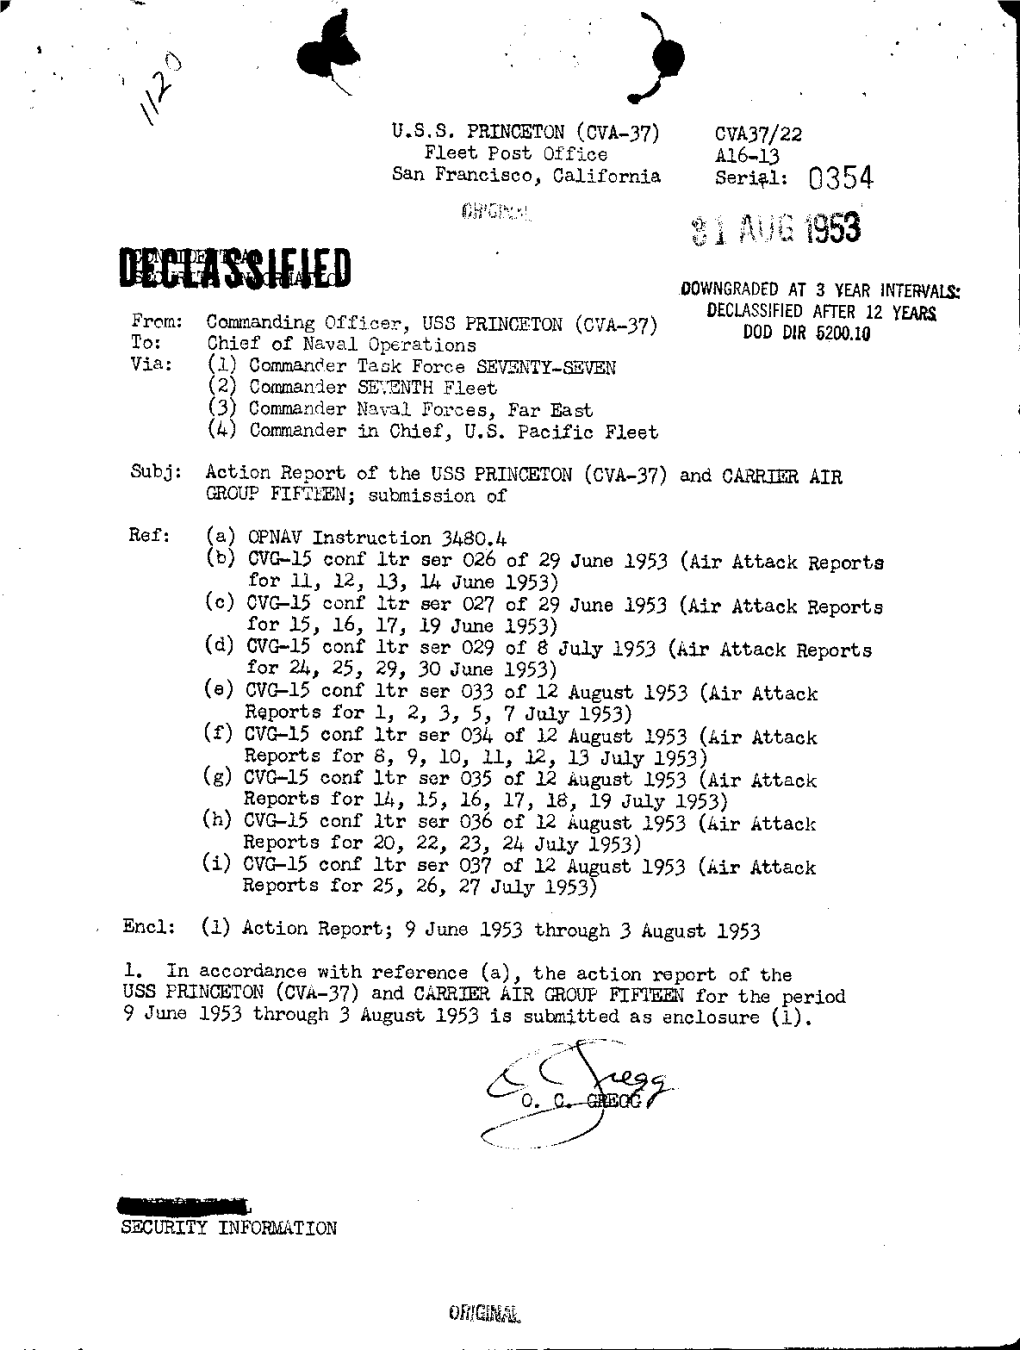 Action Report for 9 Jun-3 Aug 1953